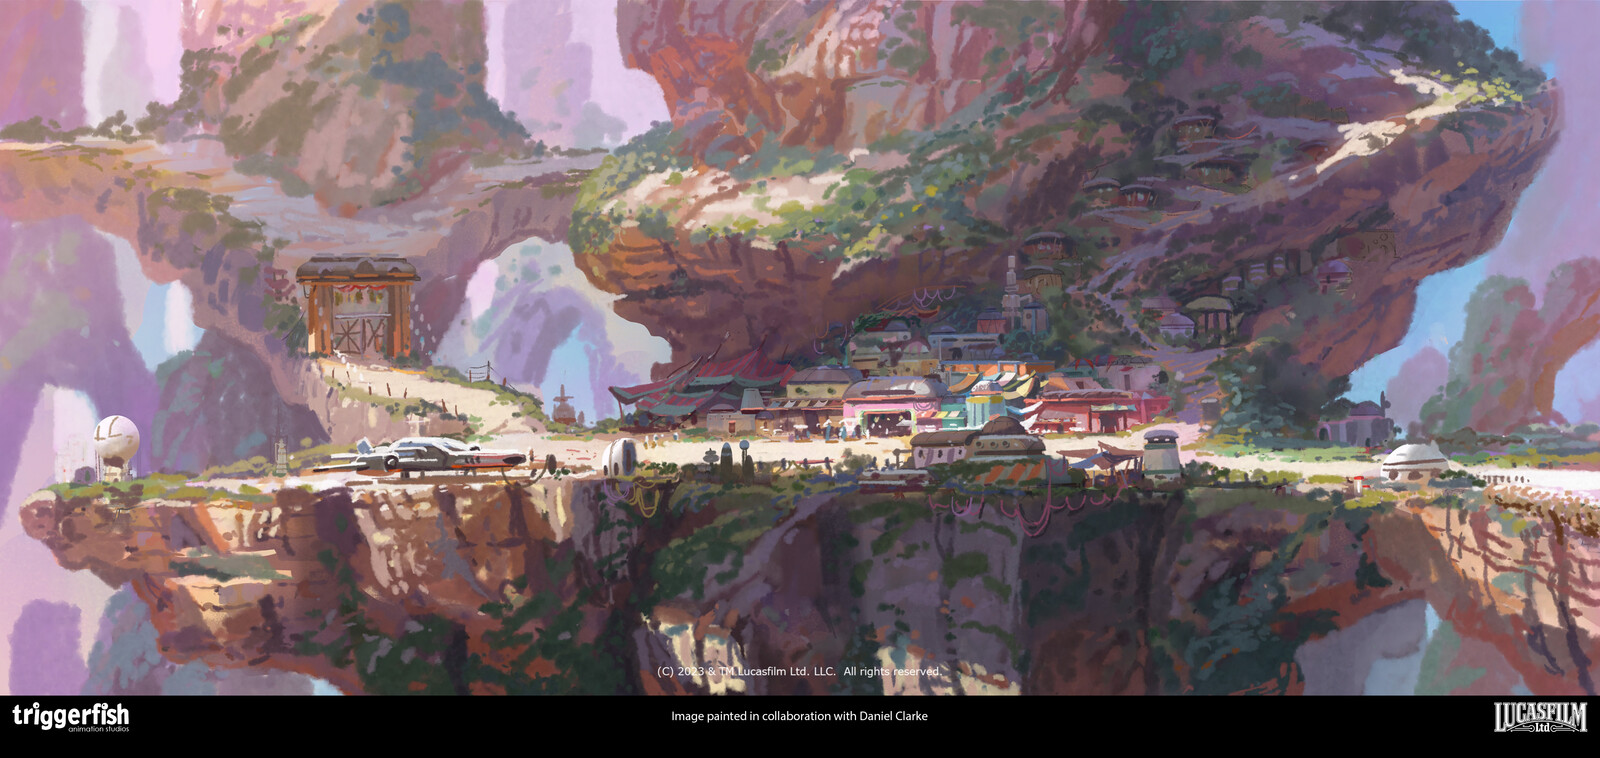 Star Wars Vision 2. "Aau's Song"  Environment Concept art